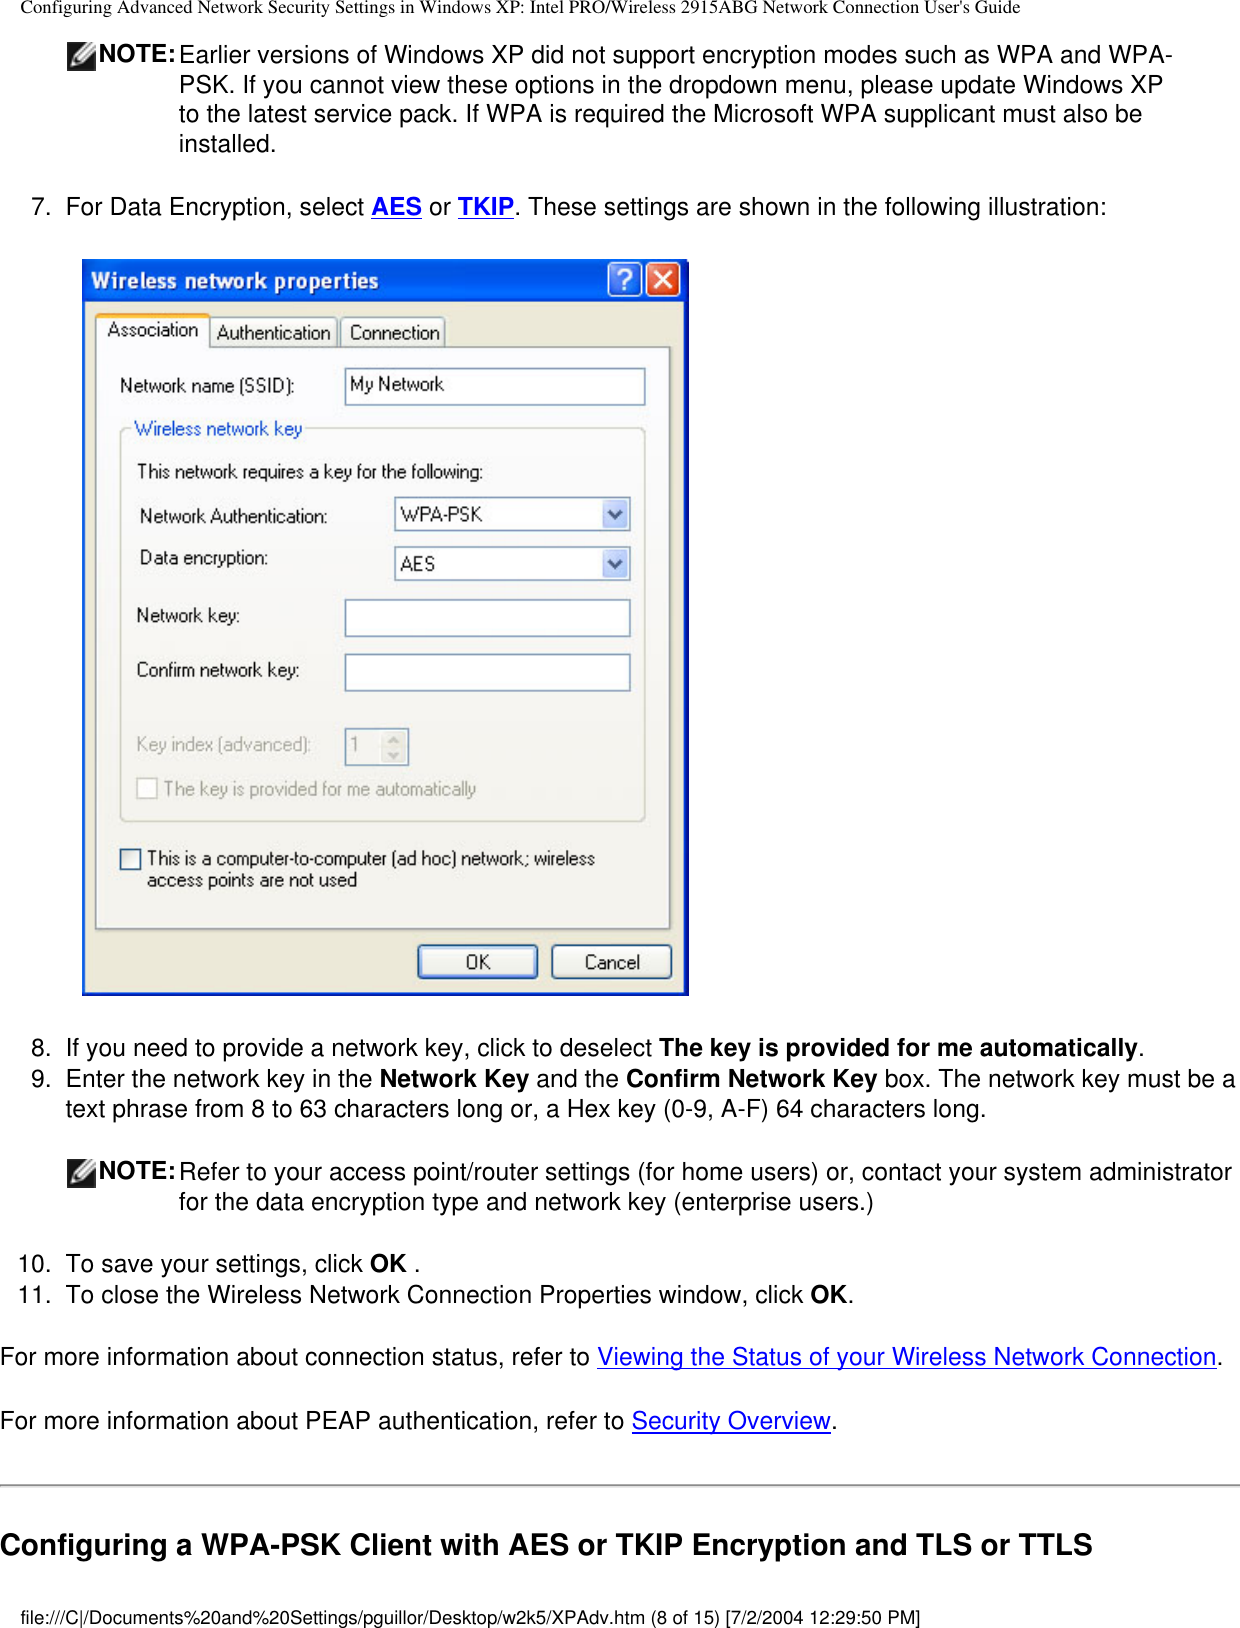 Configuring Advanced Network Security Settings in Windows XP: Intel PRO/Wireless 2915ABG Network Connection User&apos;s GuideNOTE:Earlier versions of Windows XP did not support encryption modes such as WPA and WPA-PSK. If you cannot view these options in the dropdown menu, please update Windows XP to the latest service pack. If WPA is required the Microsoft WPA supplicant must also be installed.7.  For Data Encryption, select AES or TKIP. These settings are shown in the following illustration:            8.  If you need to provide a network key, click to deselect The key is provided for me automatically.9.  Enter the network key in the Network Key and the Confirm Network Key box. The network key must be a text phrase from 8 to 63 characters long or, a Hex key (0-9, A-F) 64 characters long. NOTE:Refer to your access point/router settings (for home users) or, contact your system administrator for the data encryption type and network key (enterprise users.) 10.  To save your settings, click OK .11.  To close the Wireless Network Connection Properties window, click OK.For more information about connection status, refer to Viewing the Status of your Wireless Network Connection.For more information about PEAP authentication, refer to Security Overview.Configuring a WPA-PSK Client with AES or TKIP Encryption and TLS or TTLS file:///C|/Documents%20and%20Settings/pguillor/Desktop/w2k5/XPAdv.htm (8 of 15) [7/2/2004 12:29:50 PM]